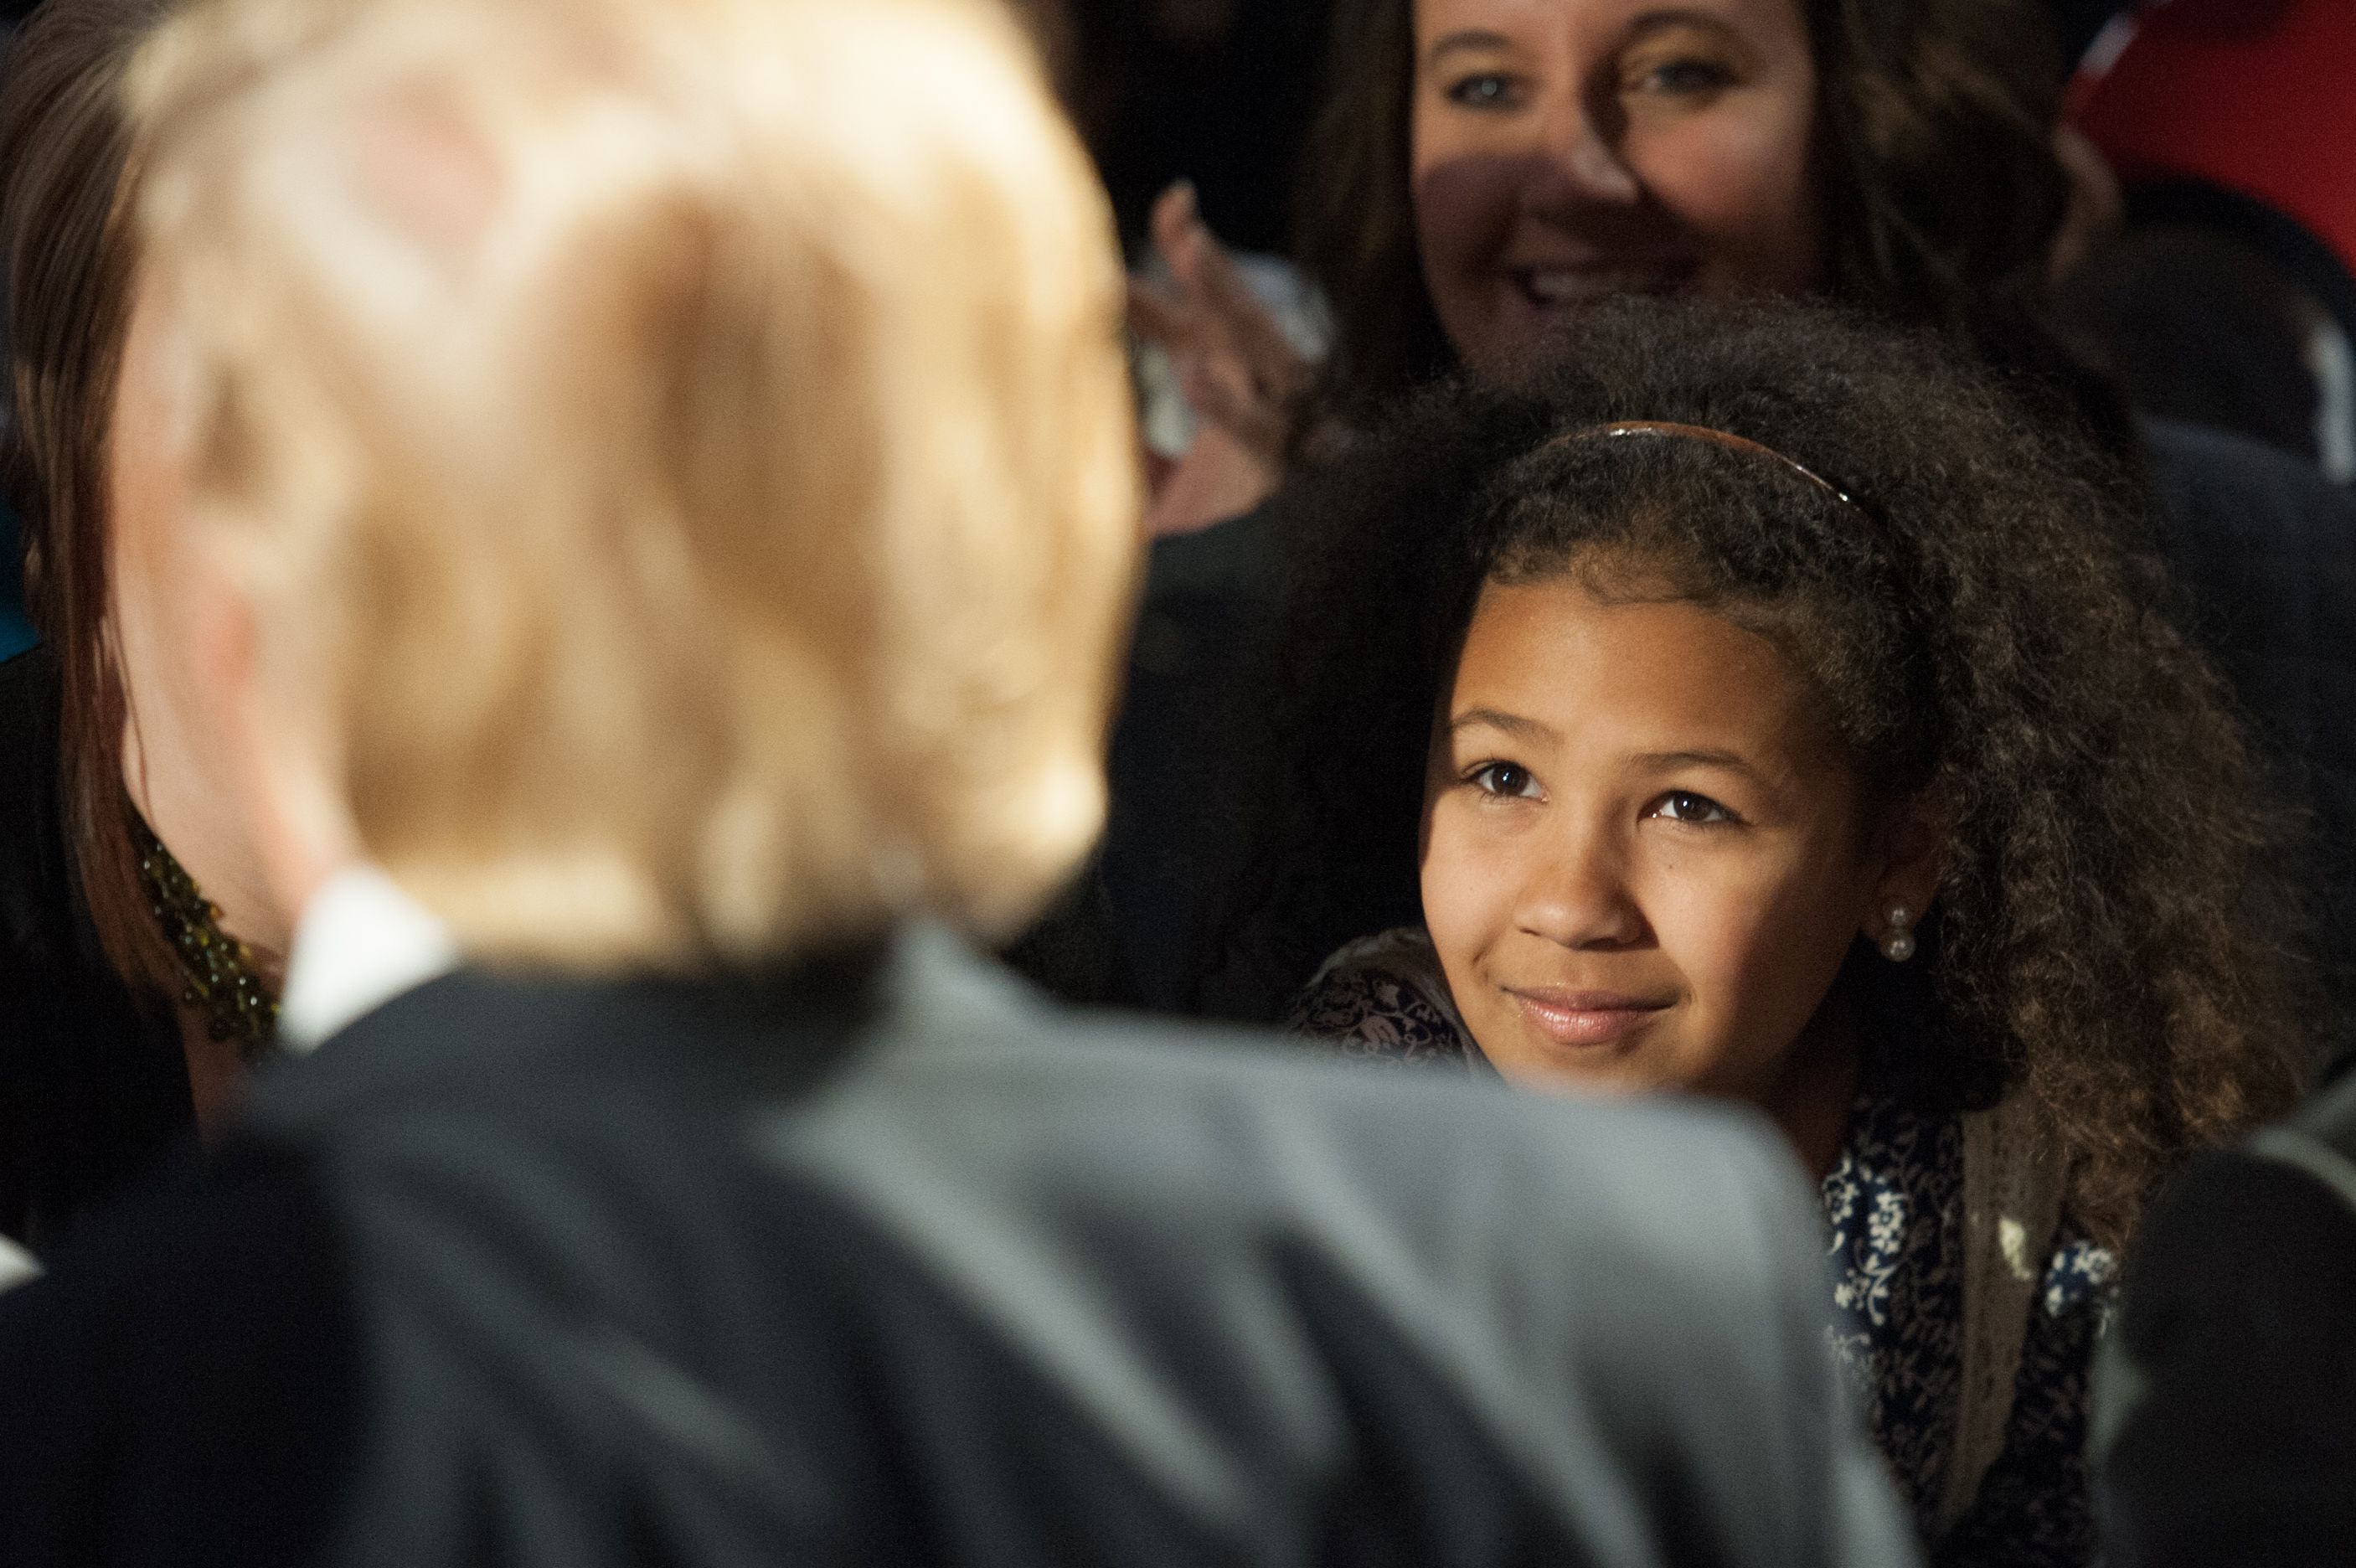 A young girl looks on as Republican Presidential candidate Donald Trump signs autographs at a rally  on Feb. 27,  in Millington, Tennesse. (MICHAEL B. THOMAS/AFP/Getty Images)